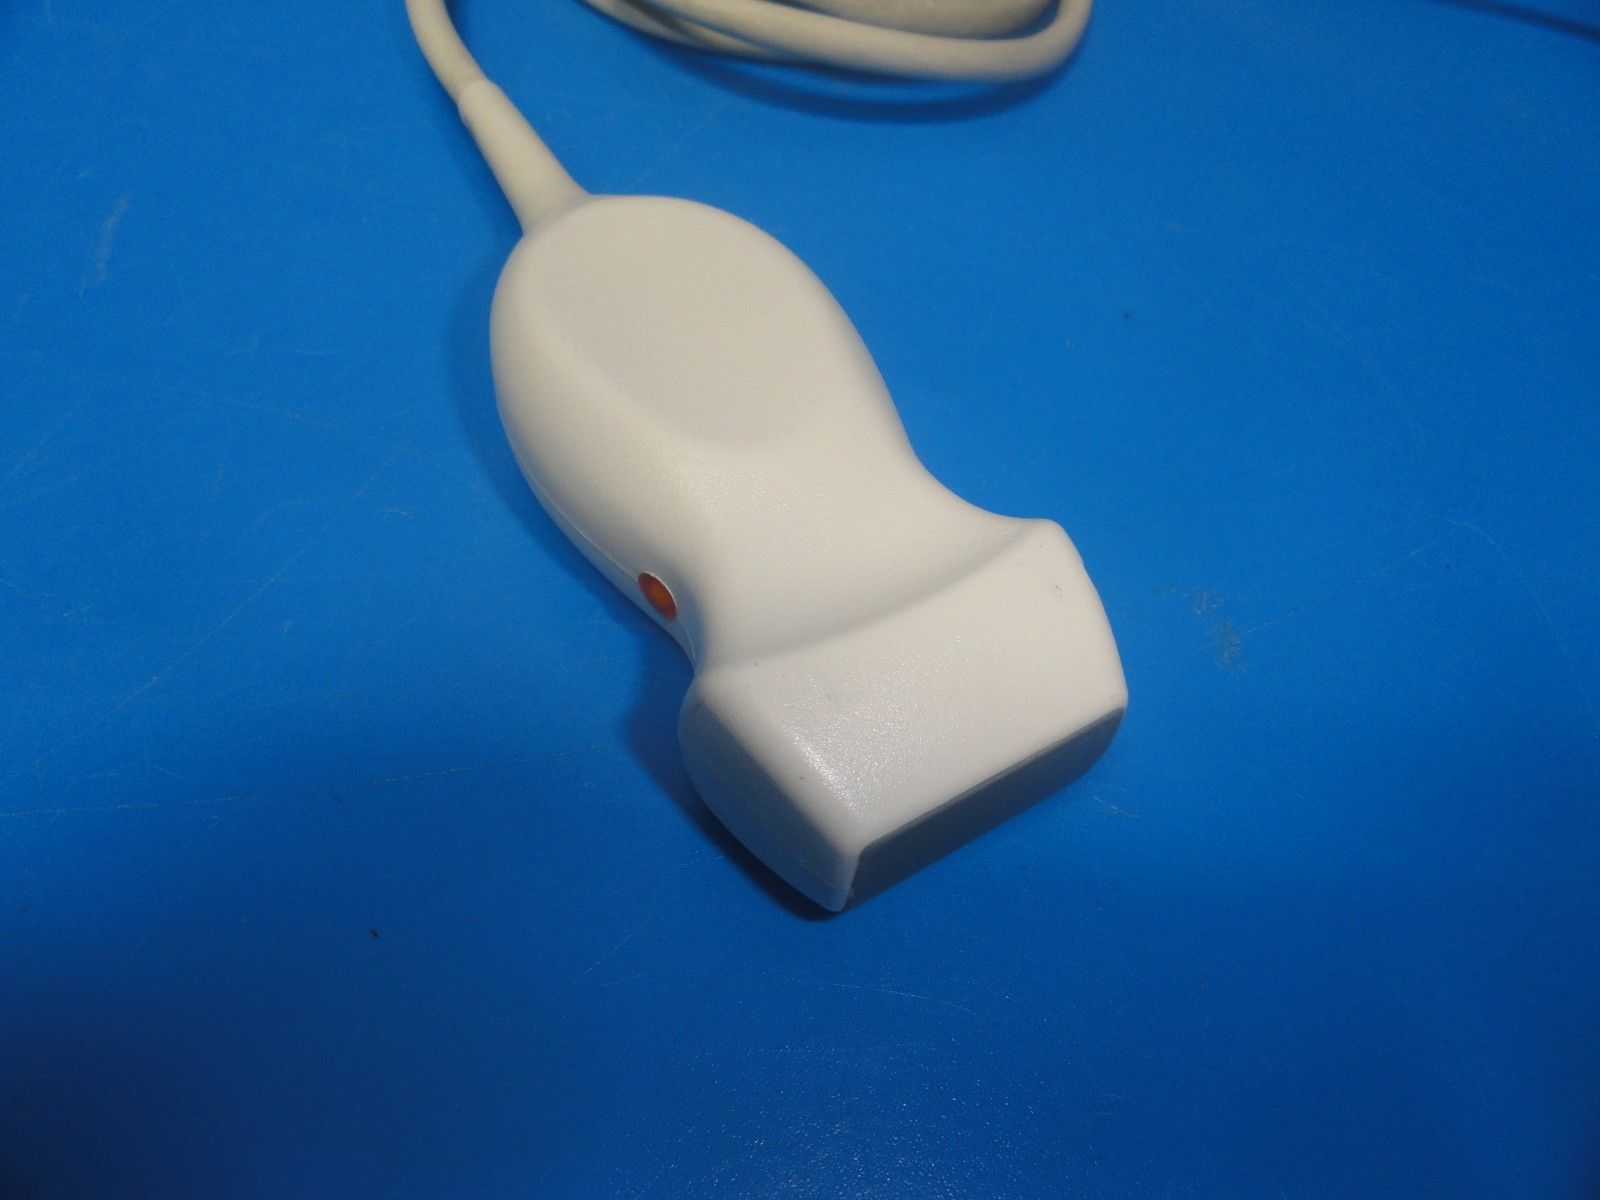 a white cord plugged into a computer mouse